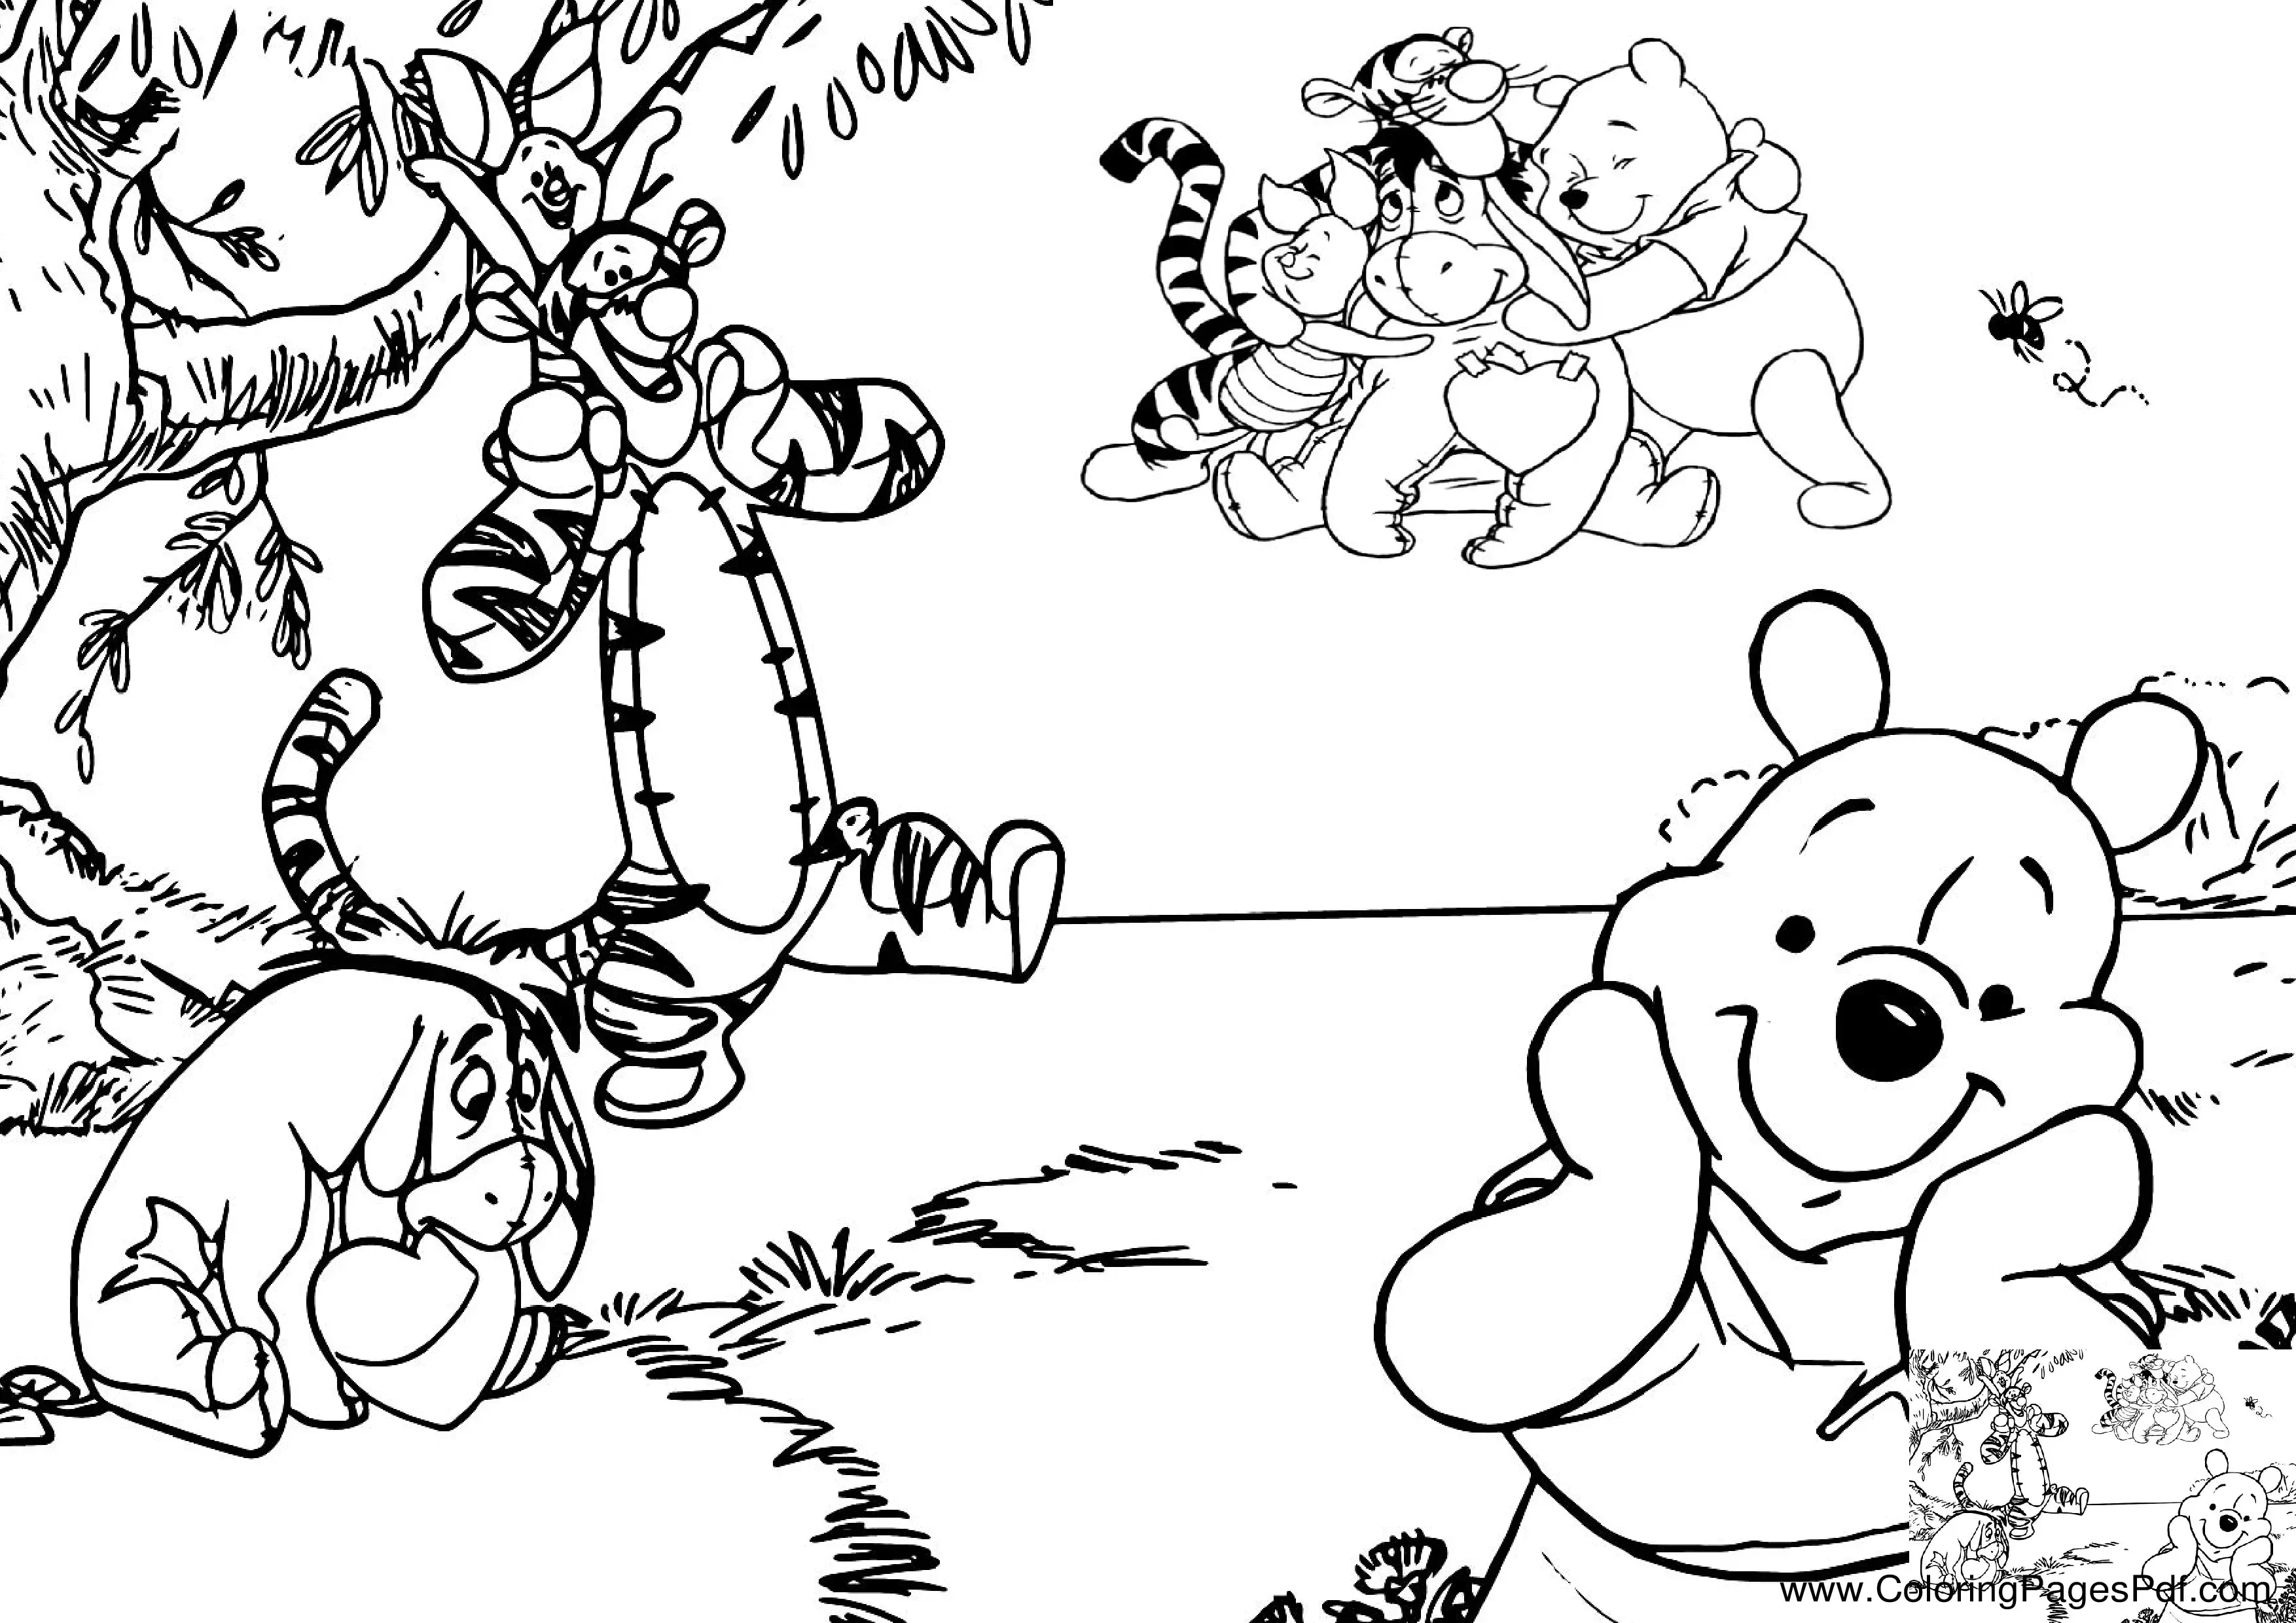 Winnie the pooh coloring pages easy